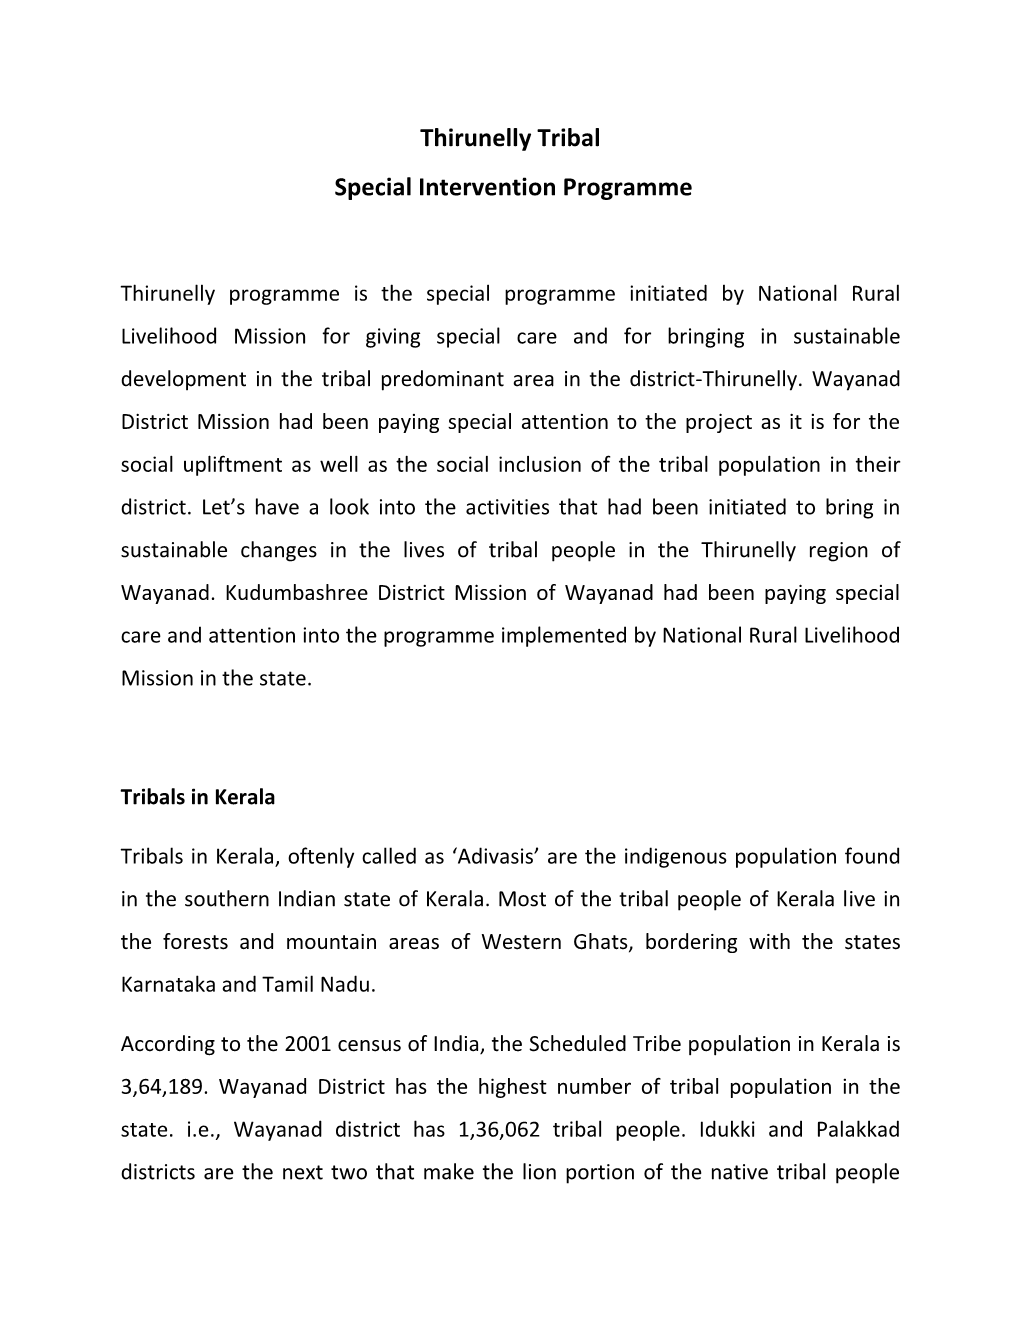 Thirunelly Tribal Special Intervention Programme